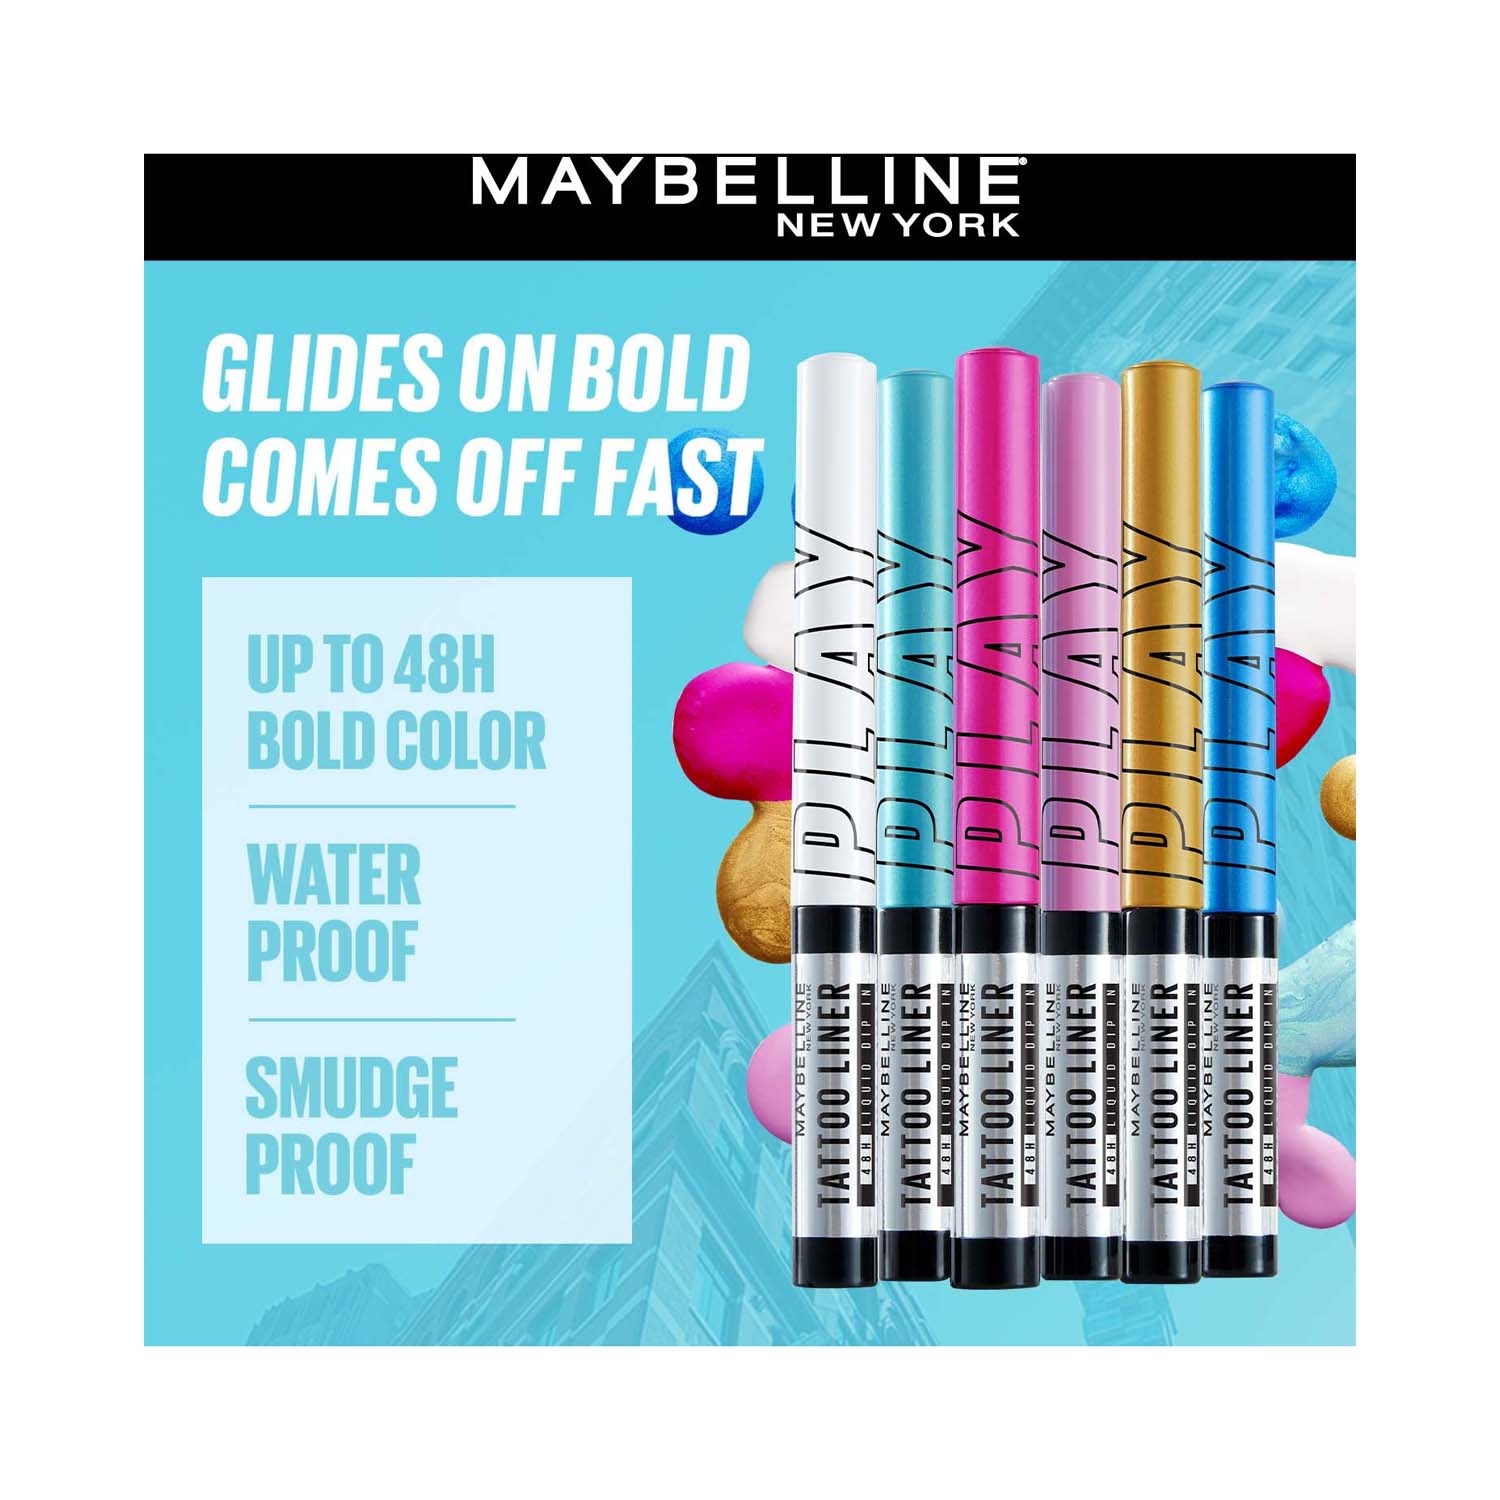 Buy Maybelline New York Tattoo Play White Liquid Eyeliner - Longwear  Waterproof Eyeliner - Matte Finish, Defend, 2.1ml Online at Low Prices in  India - Amazon.in